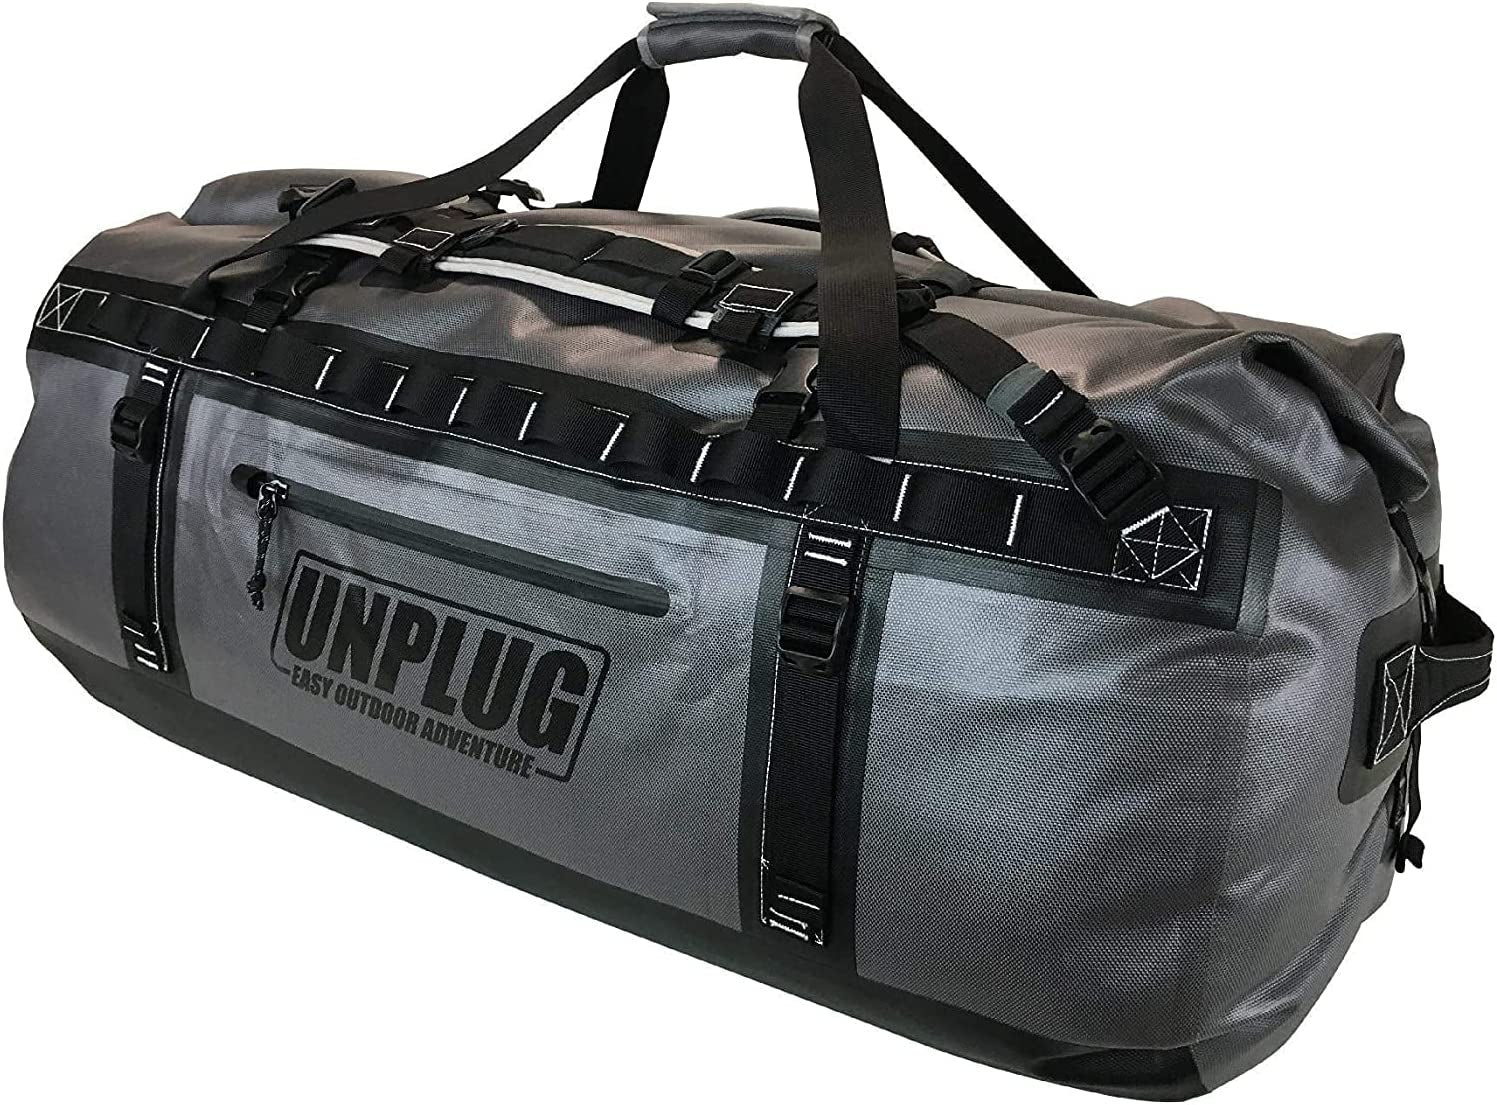 Unplug Ultimate Adventure Bag -1680D Heavy Duty Waterproof Duffel Bag for Boating, Motorcycling, Hunting, Camping, Kayaks or Jet Ski. Gets Gear through Any Conditions